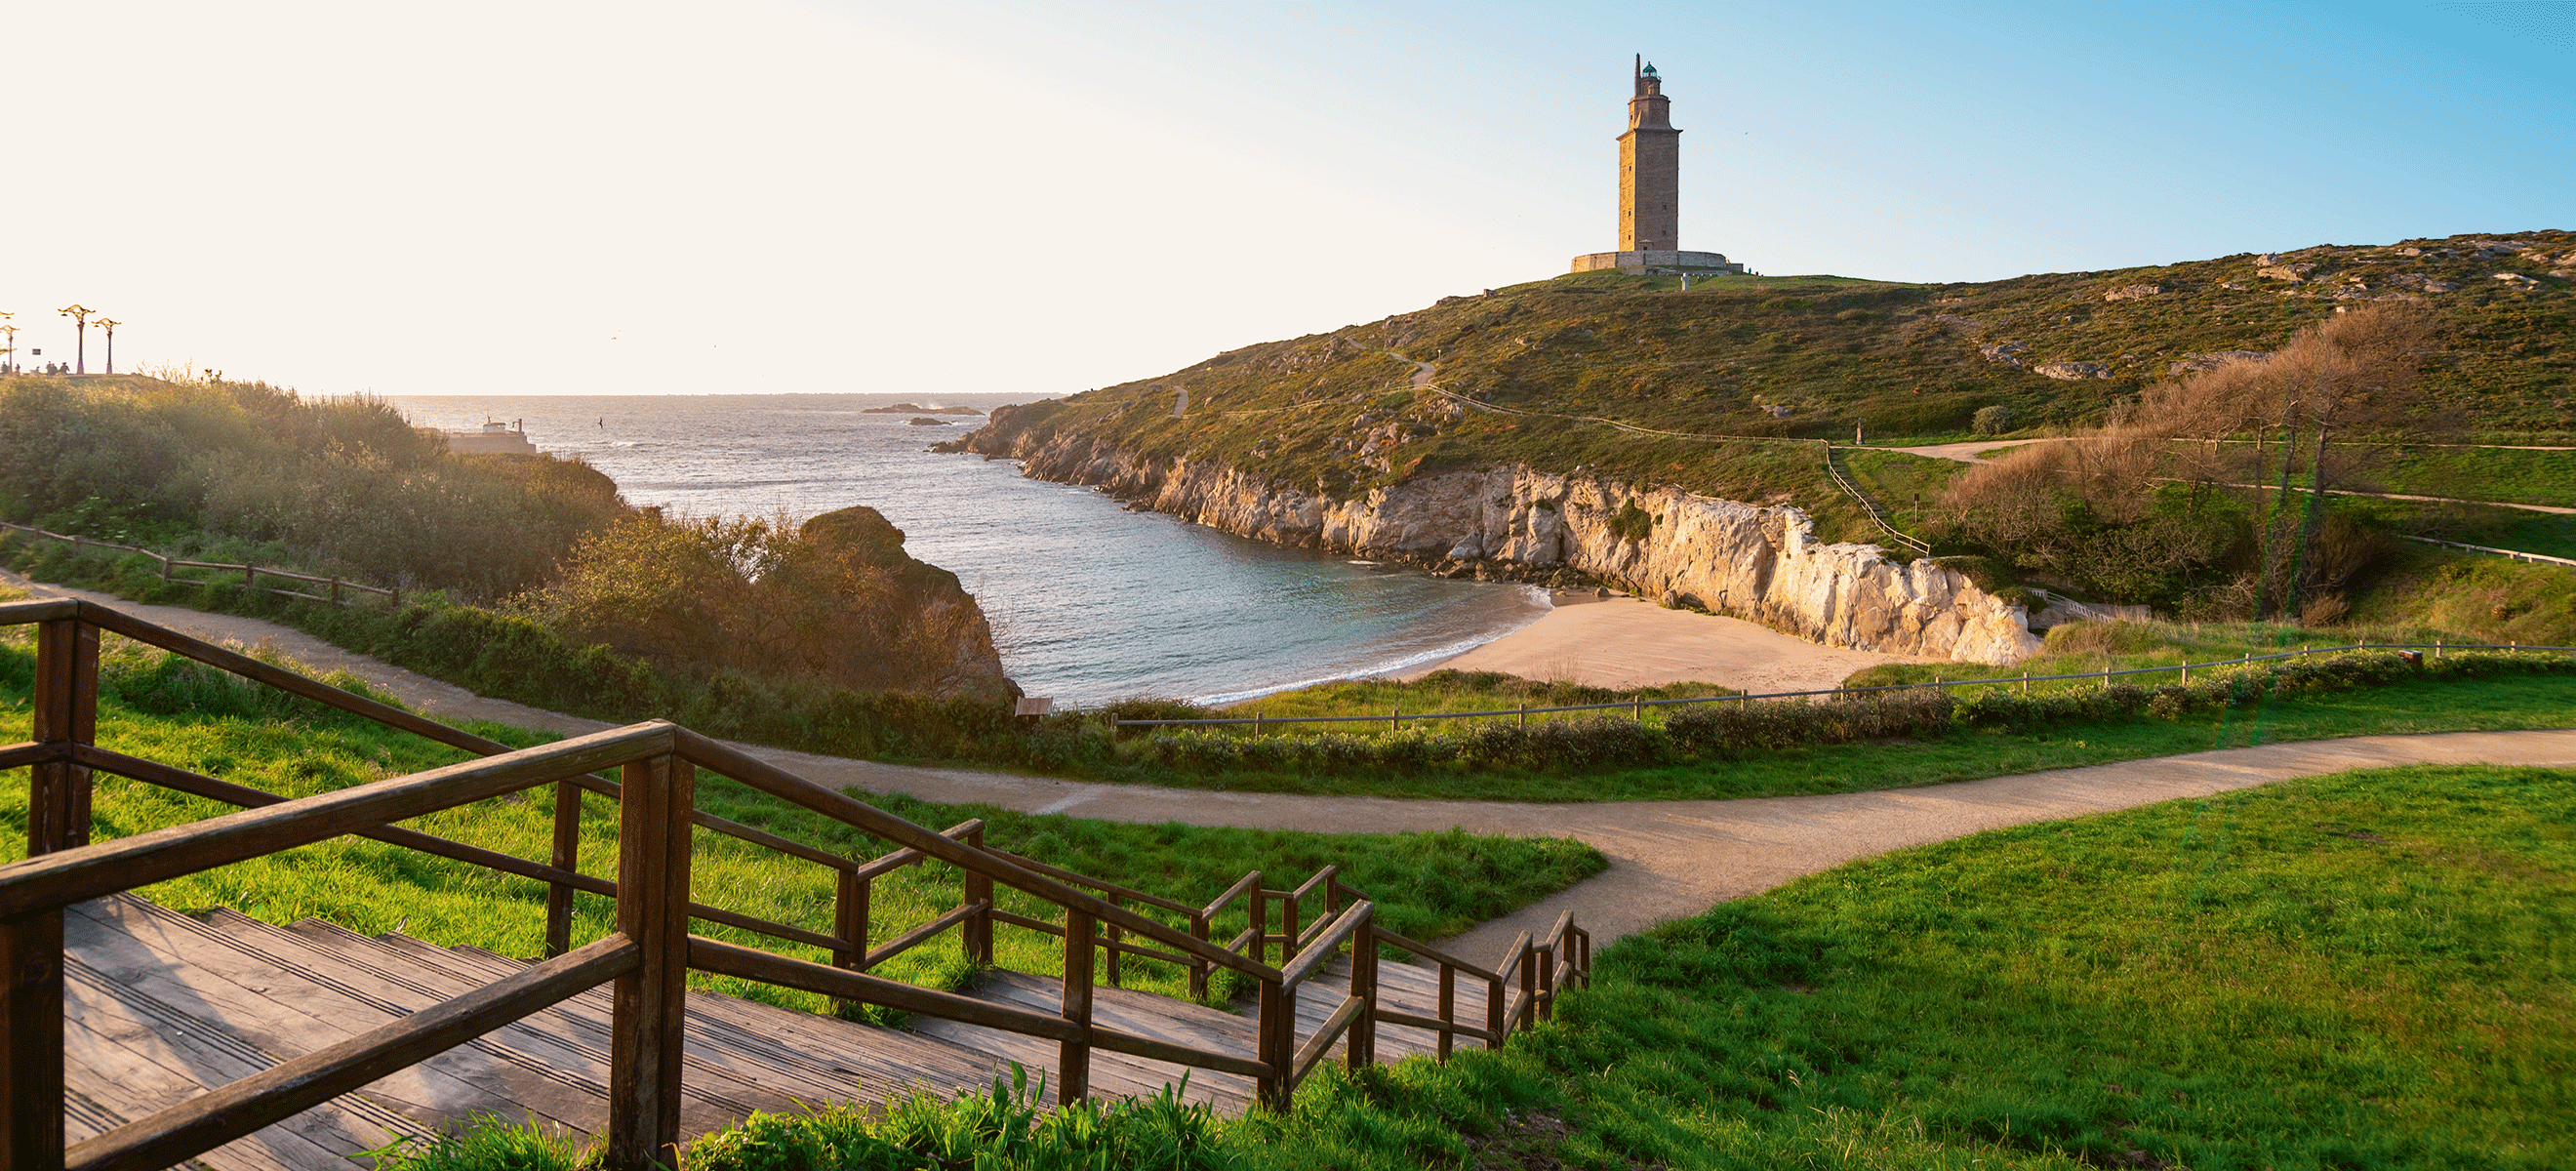 The ancient Roman Tower of&nbsp;Hercules&nbsp;lighthouse at the entrance to&nbsp;A Coruña.